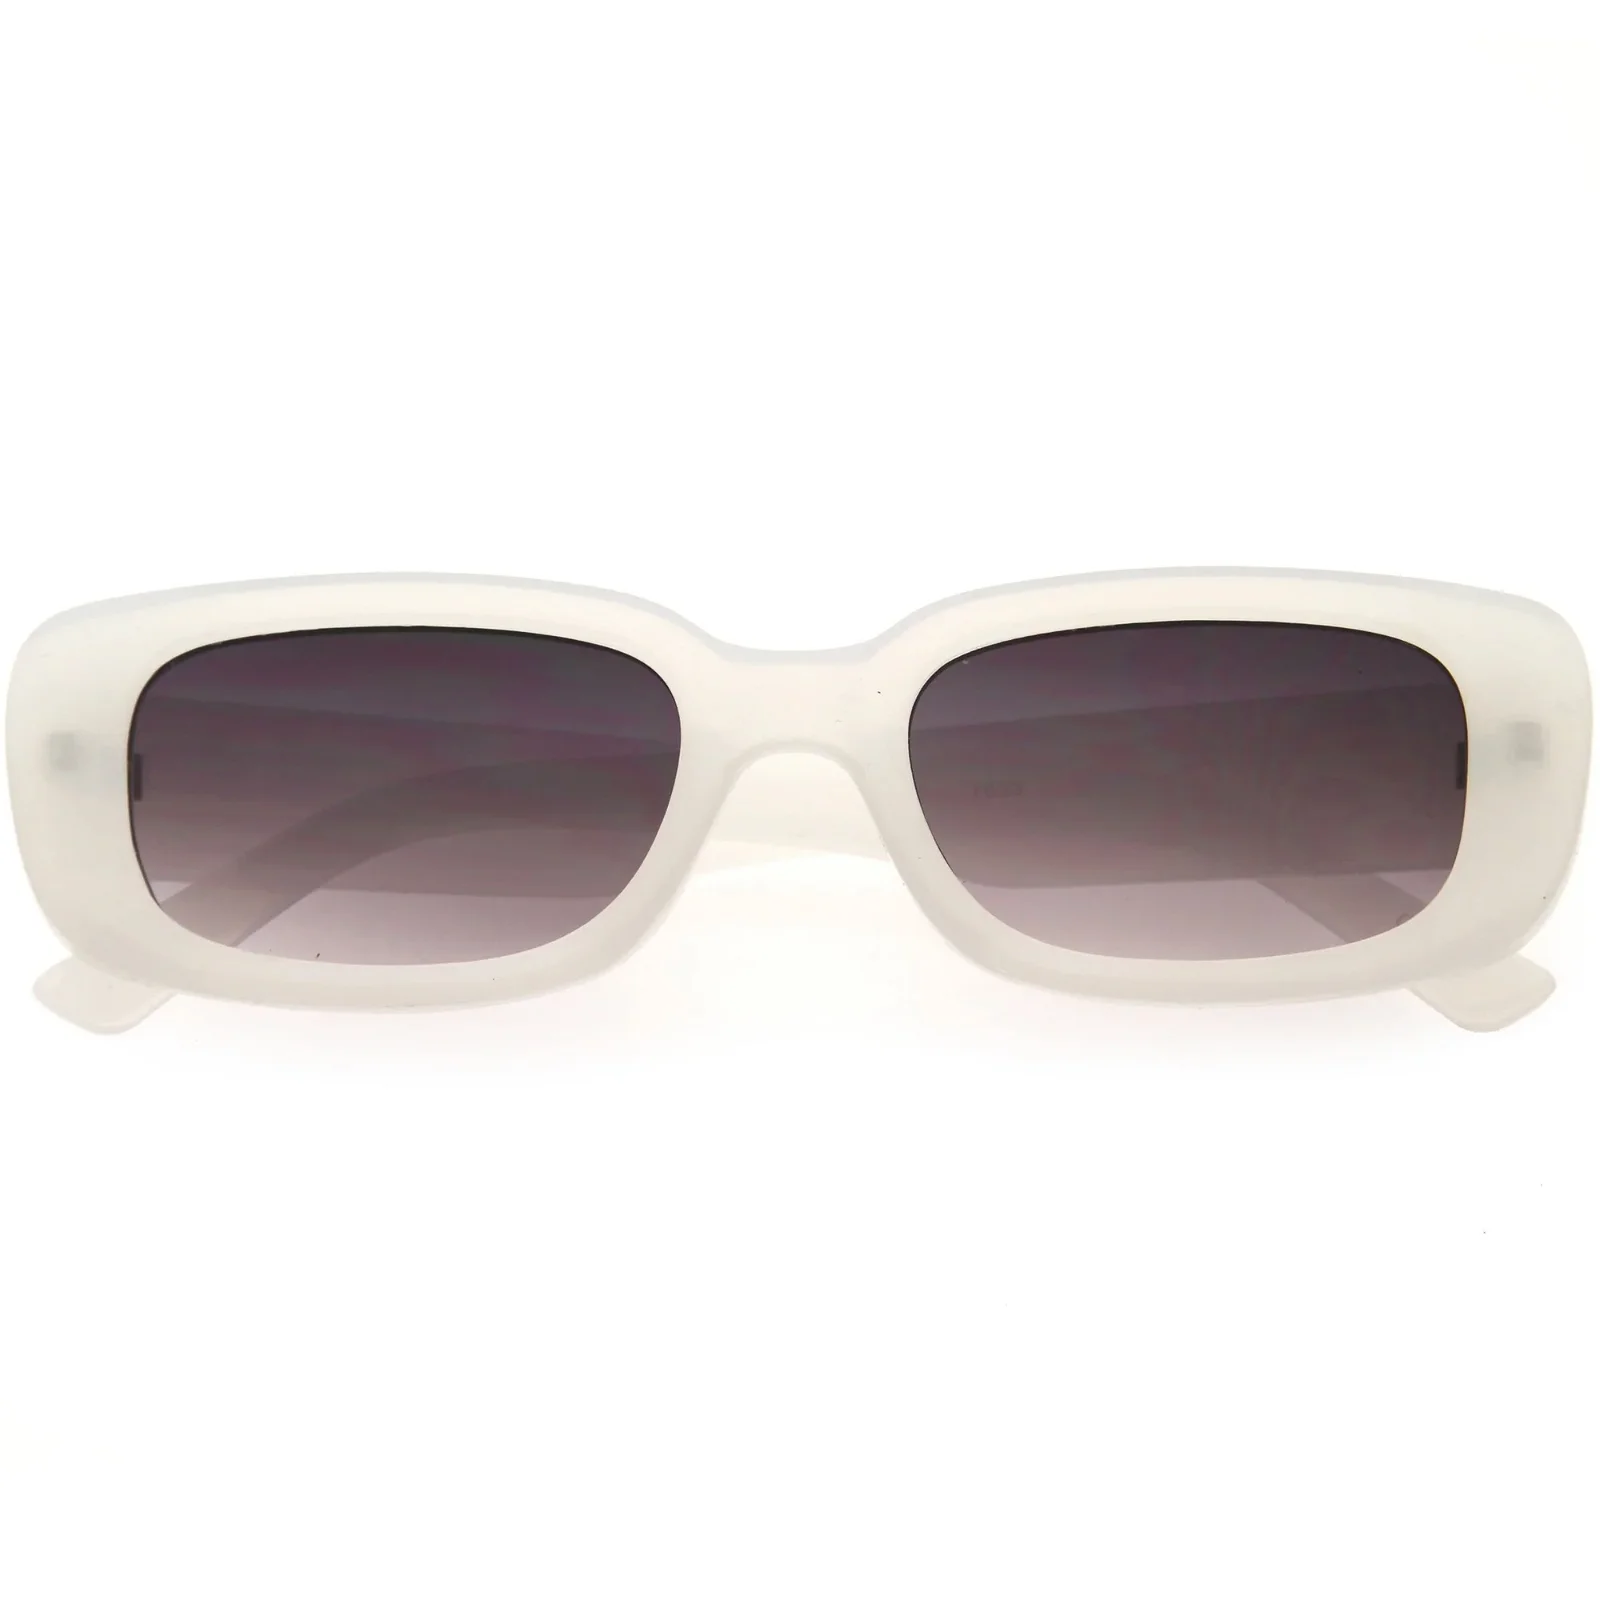 Image of Retro Wide Vintage-Inspired Fashion Square Sunglasses D277